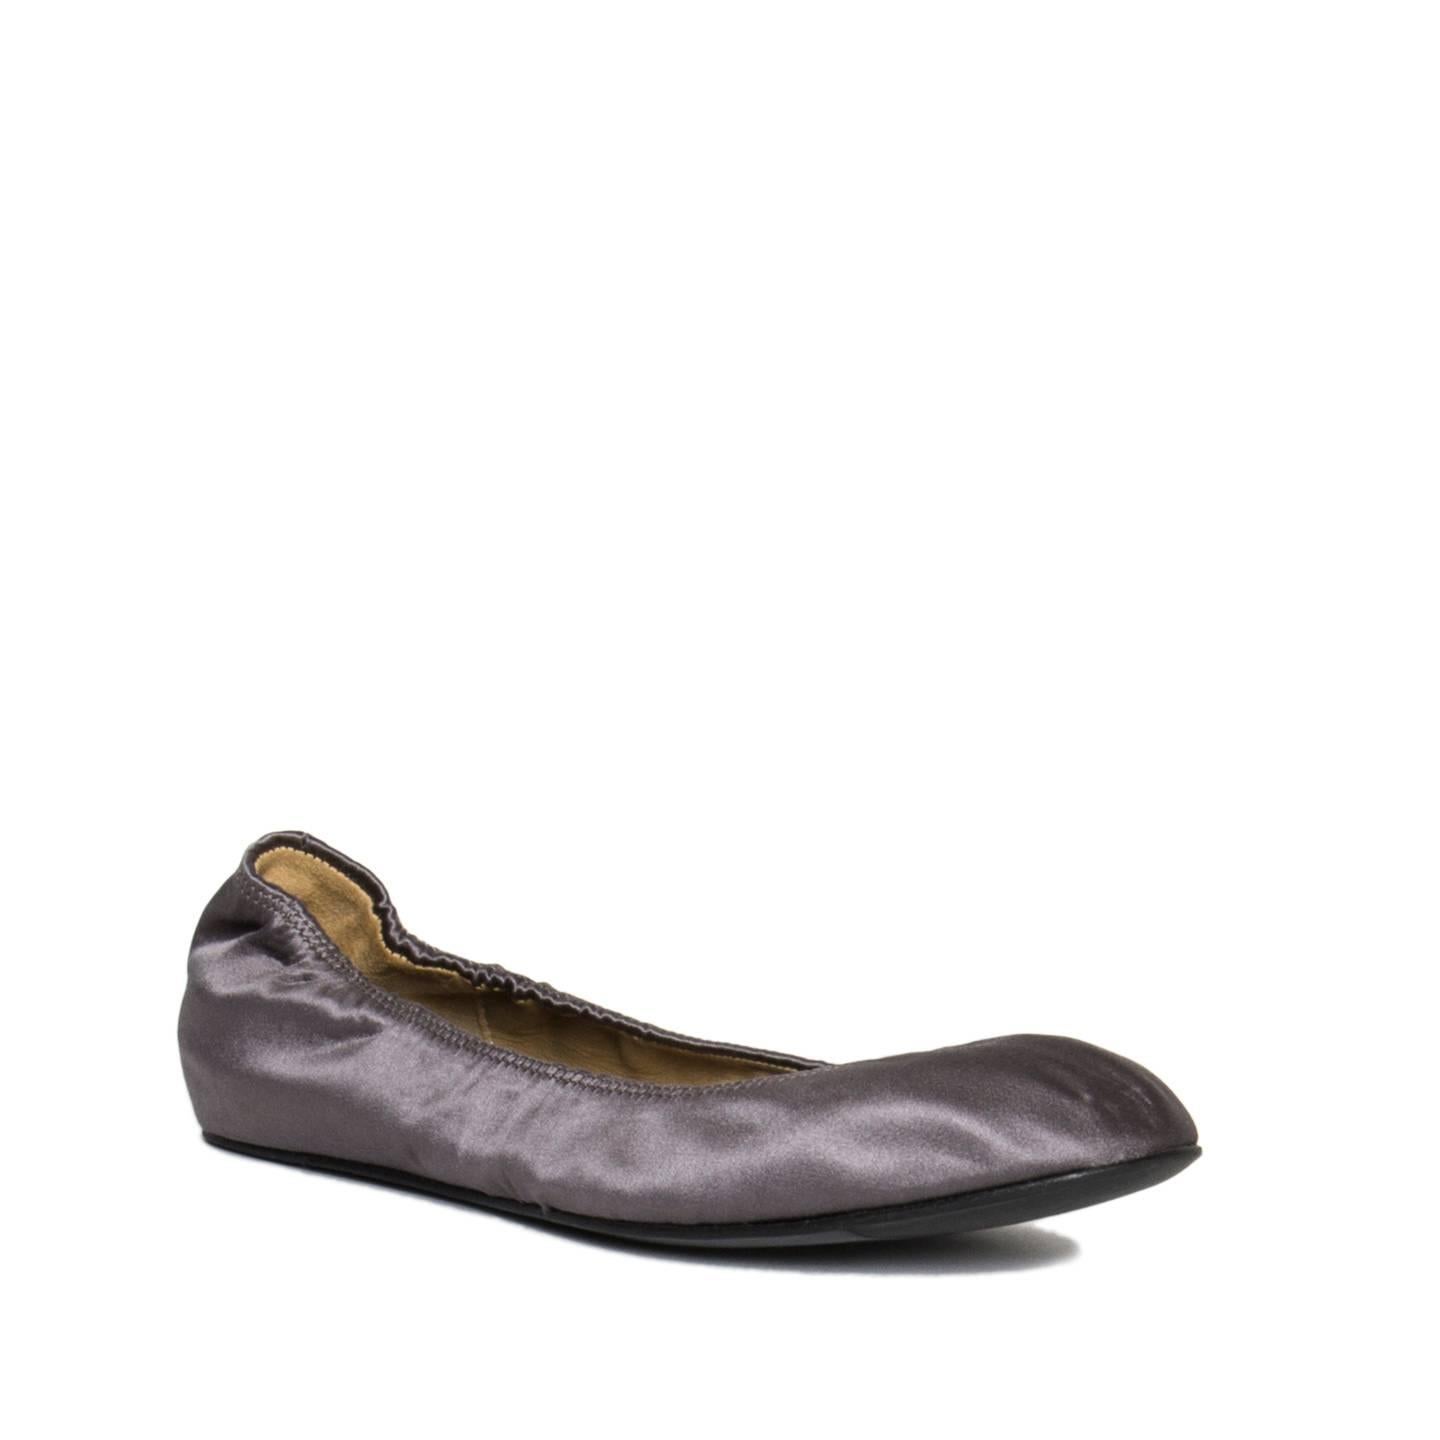 Lanvin 2006. Mauve sateen ballet flats with round toe. Made in Italy.

Size  41 Italian sizing

Condition  Excellent: never worn